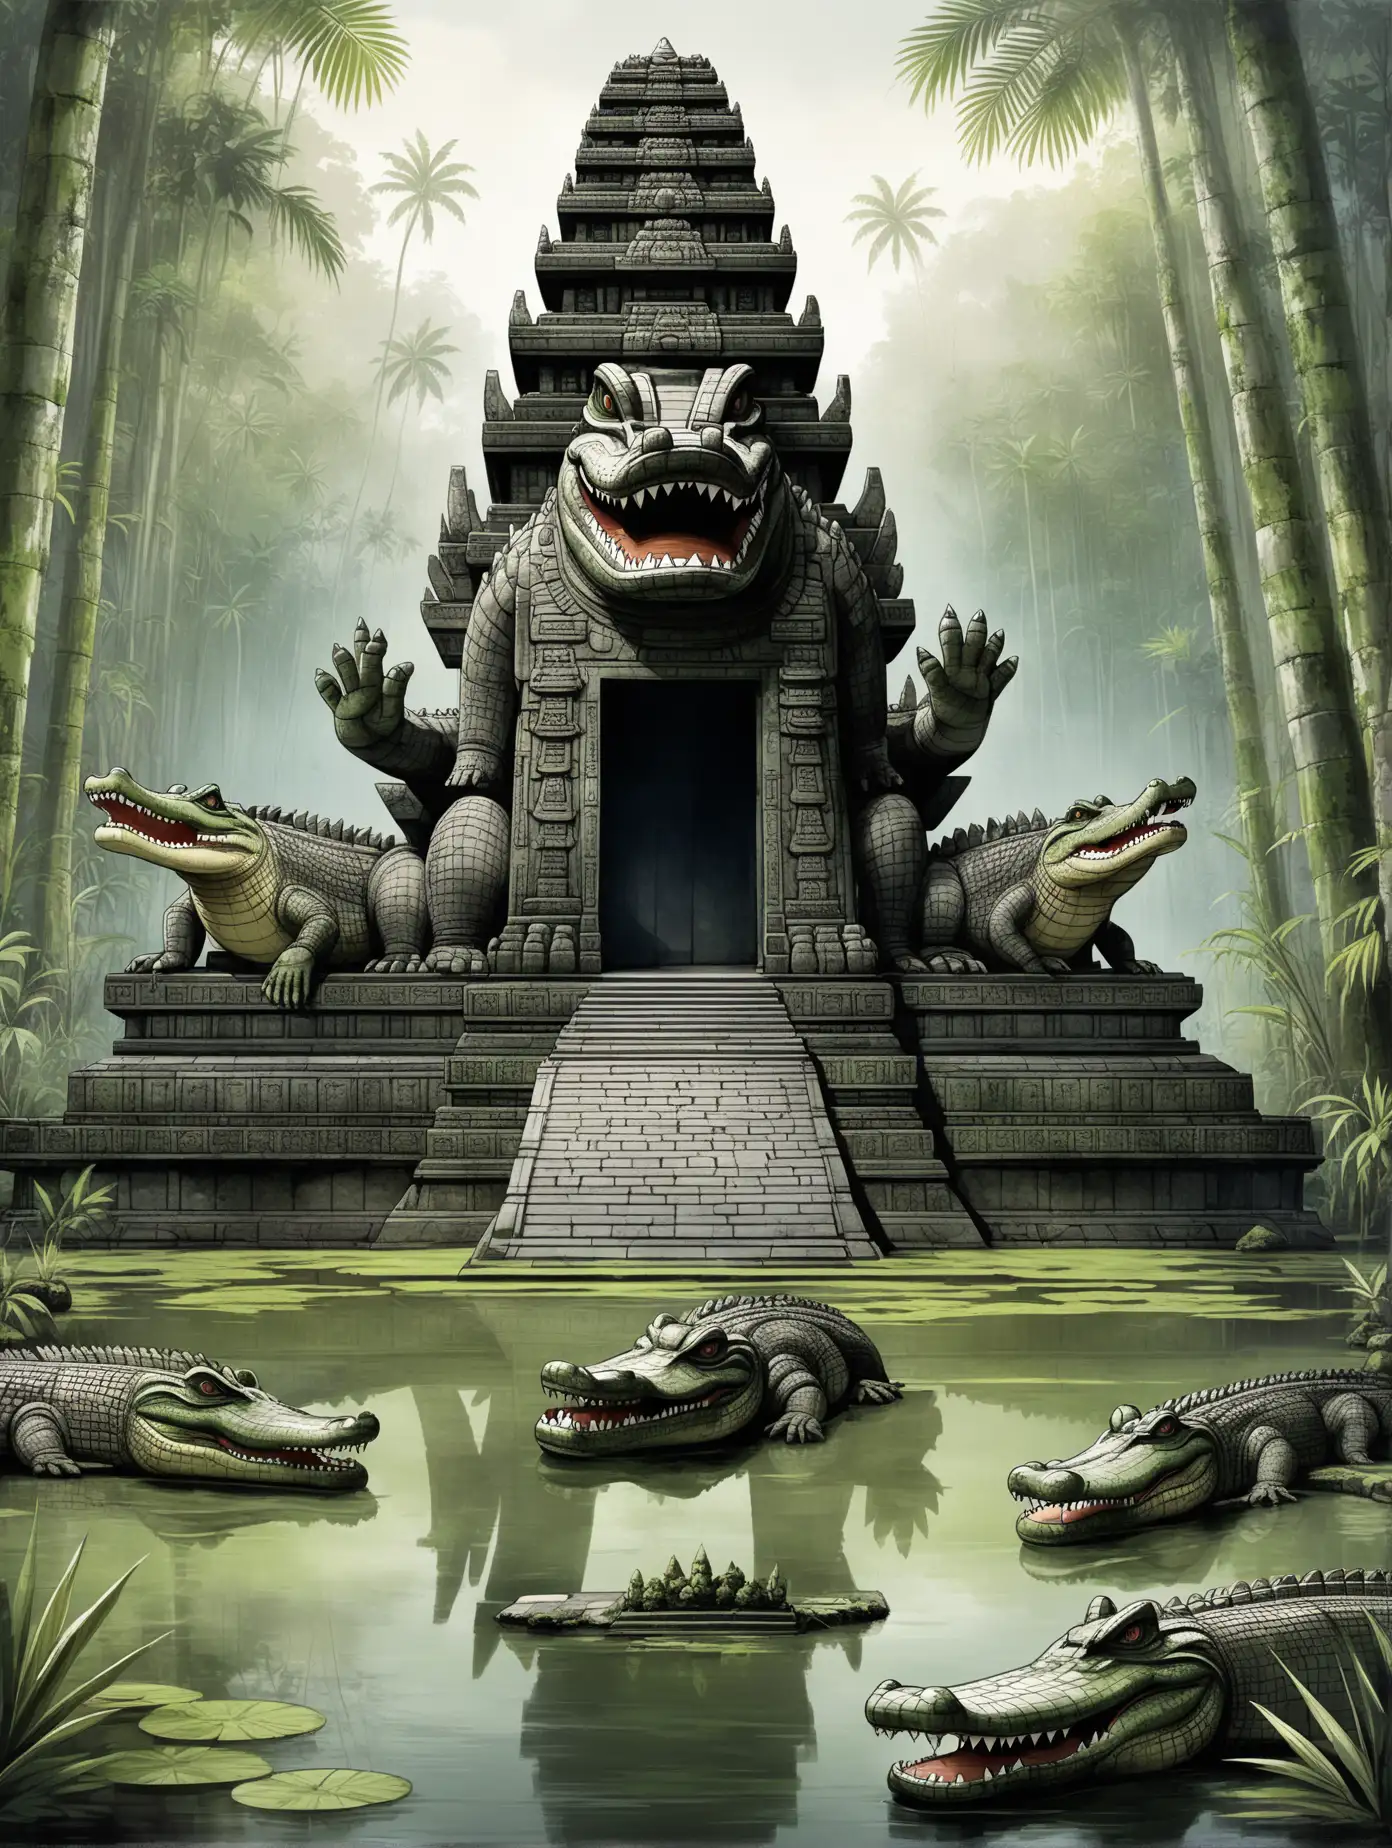 Ancient-Indonesian-Stone-Temple-with-Crocodile-Statue-in-Swamp